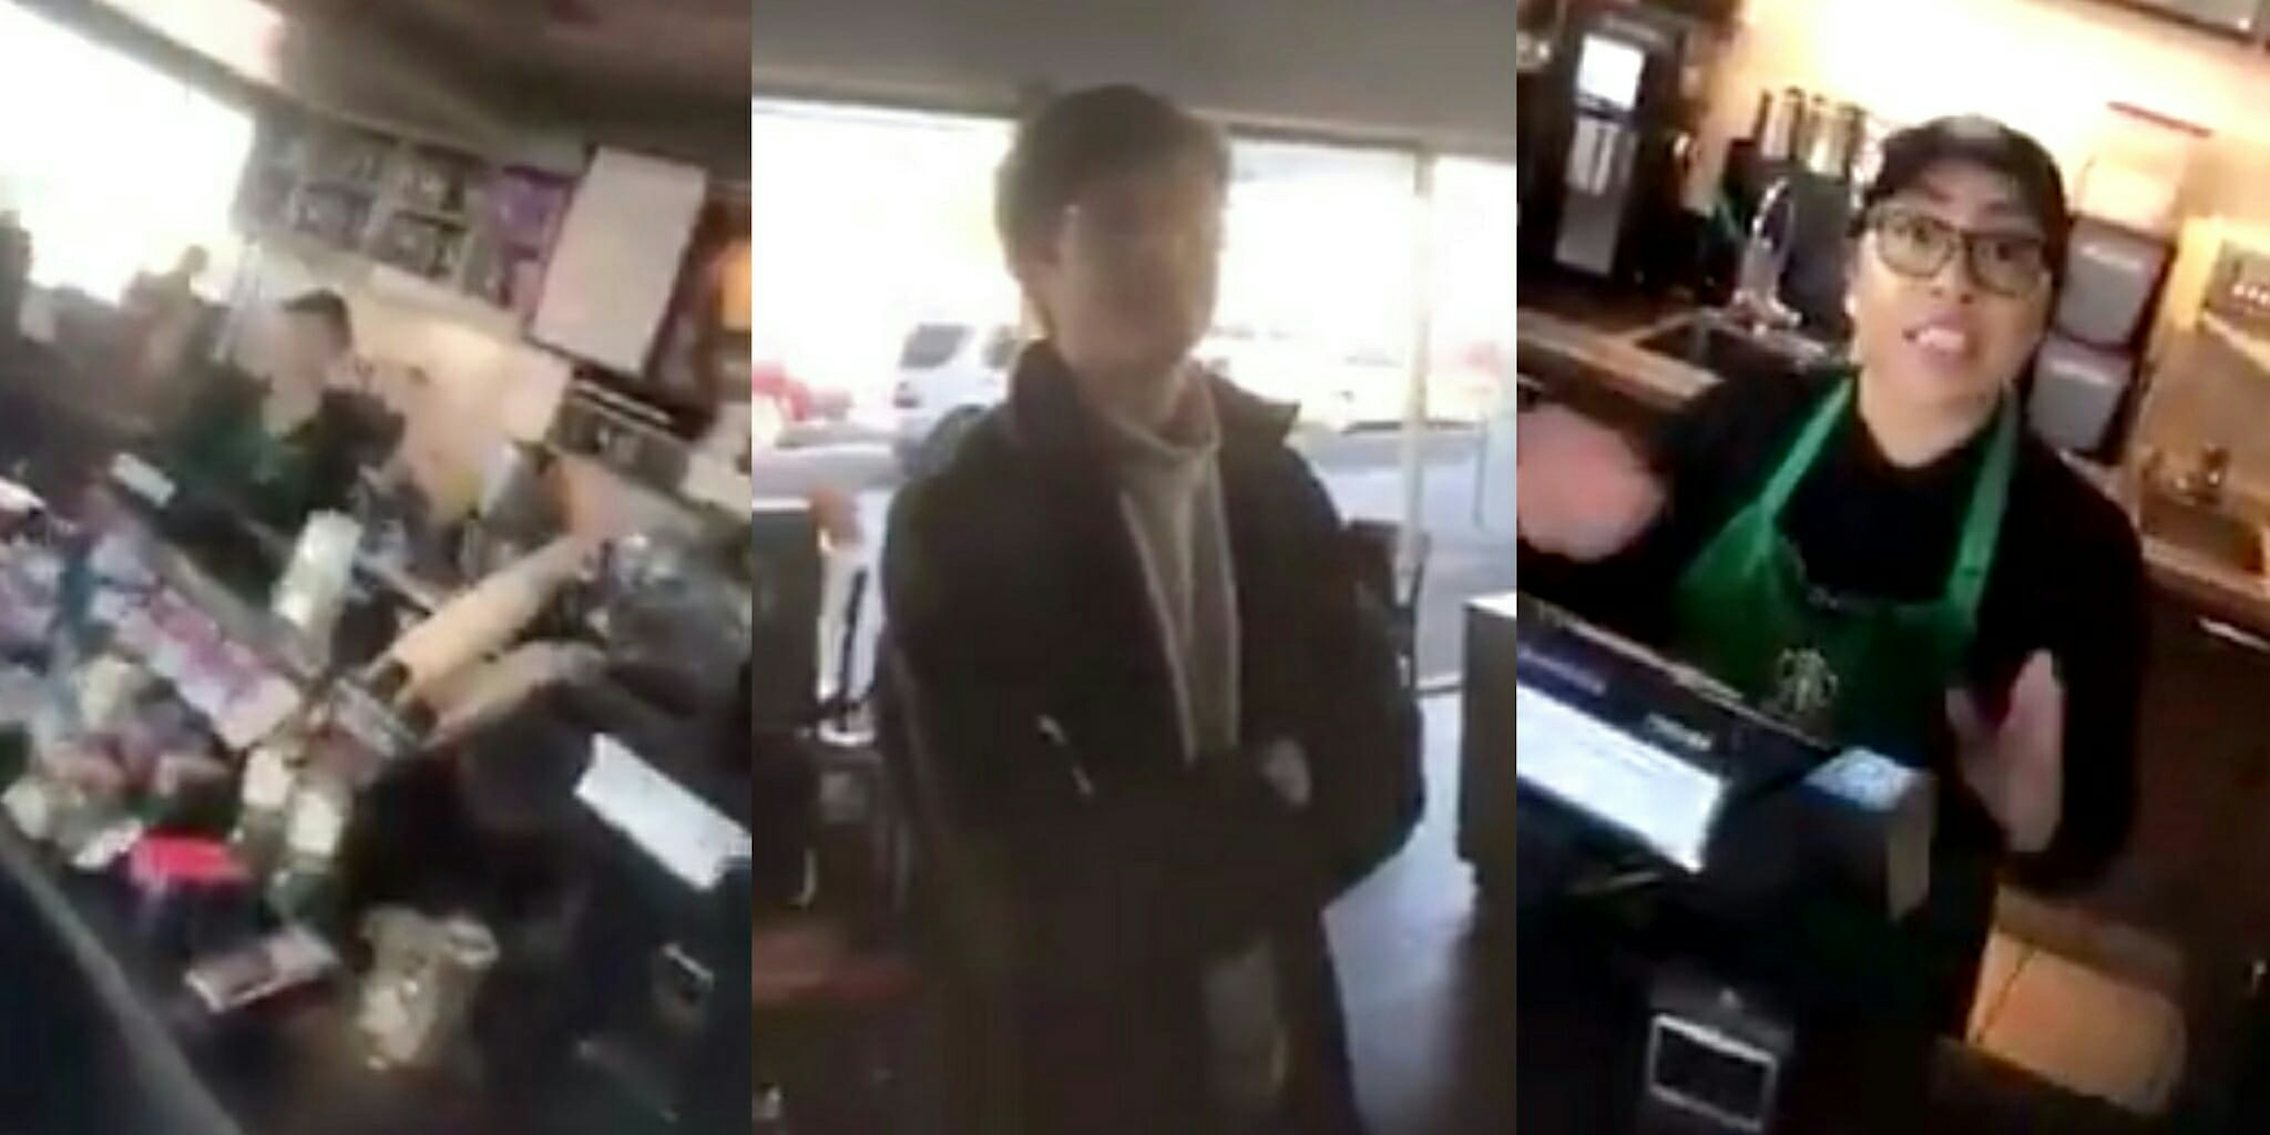 A Black Starbucks patron takes a video showing that store operators let a white man use the bathroom without purchasing anything but wouldn't let him do the same.